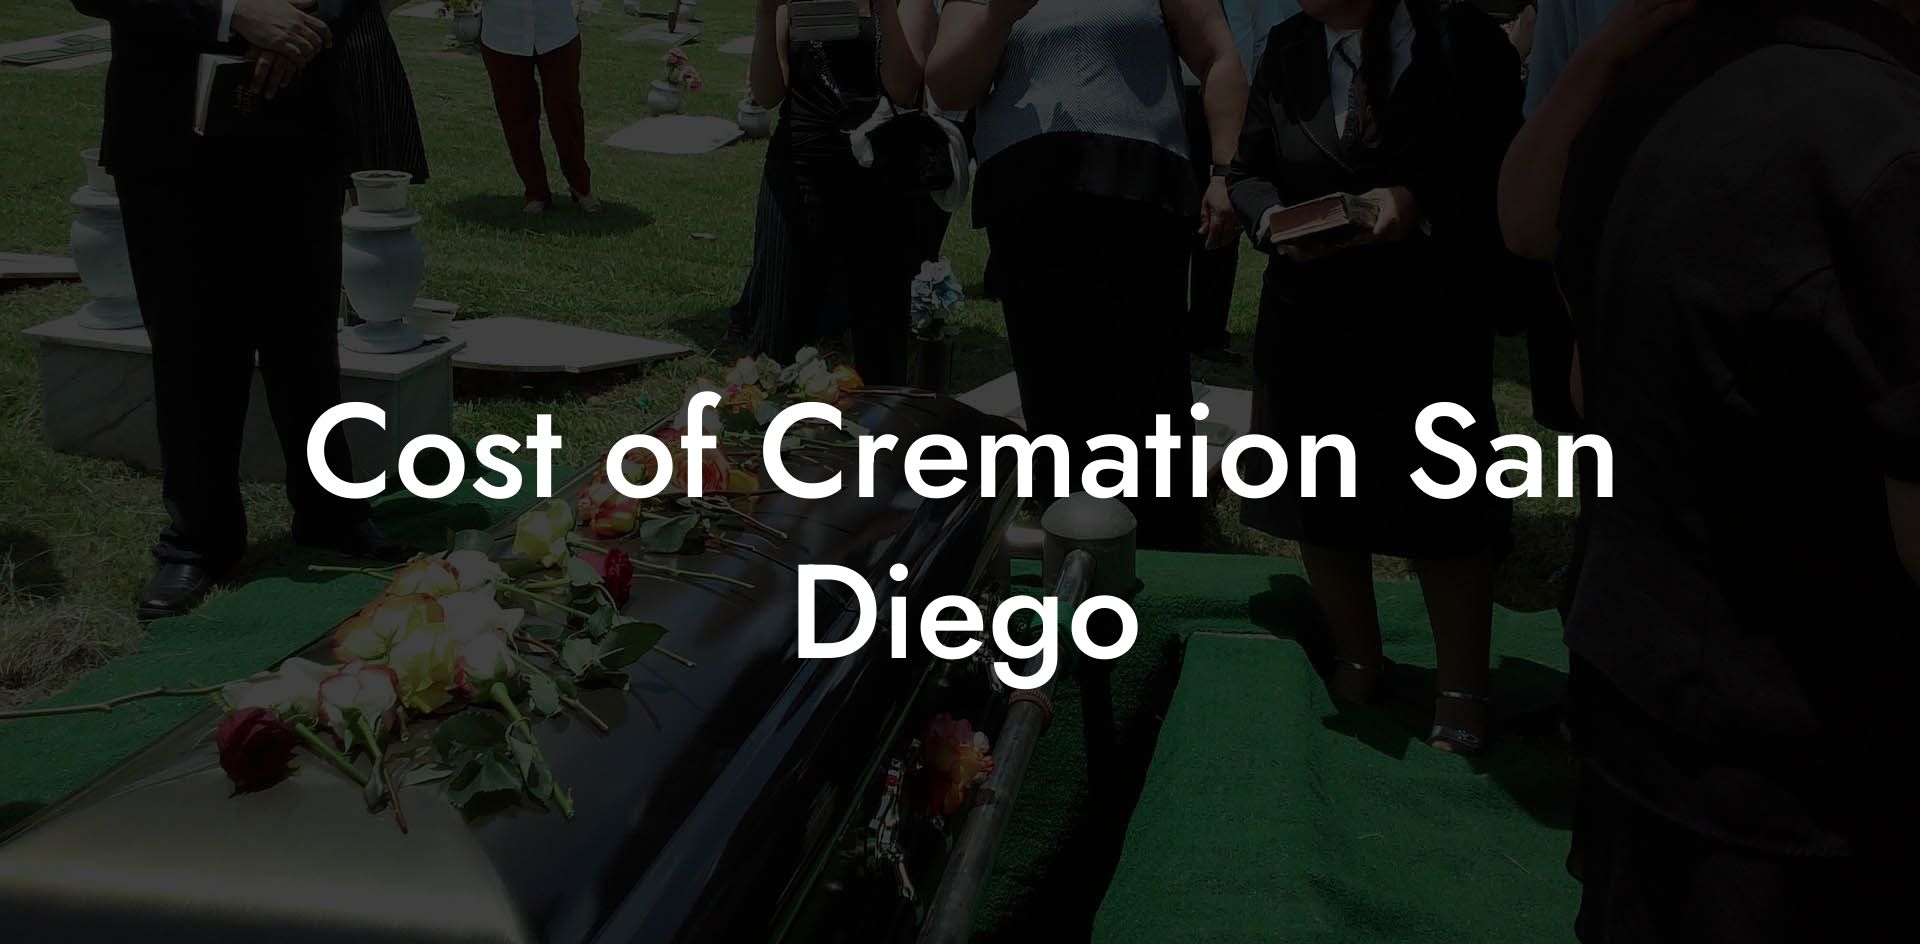 Cost of Cremation San Diego